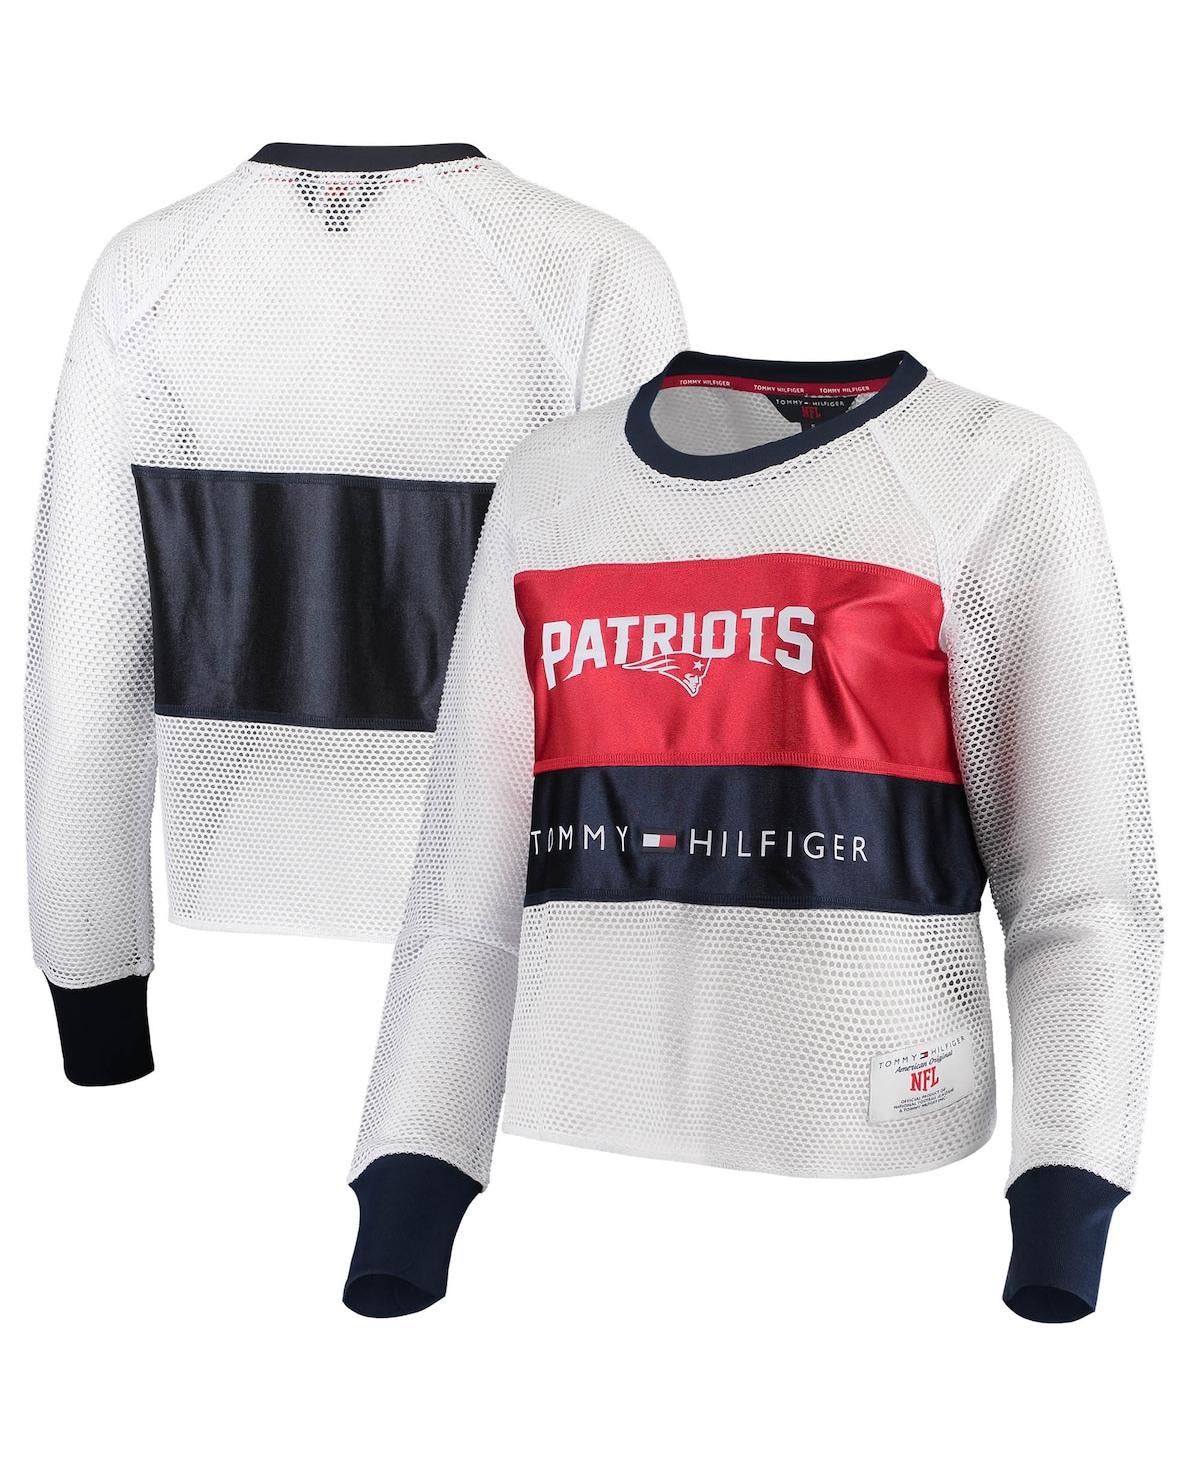 TOMMY HILFIGER WOMEN'S TOMMY HILFIGER WHITE AND RED NEW ENGLAND PATRIOTS MESH RAGLAN LONG SLEEVE T-SHIRT